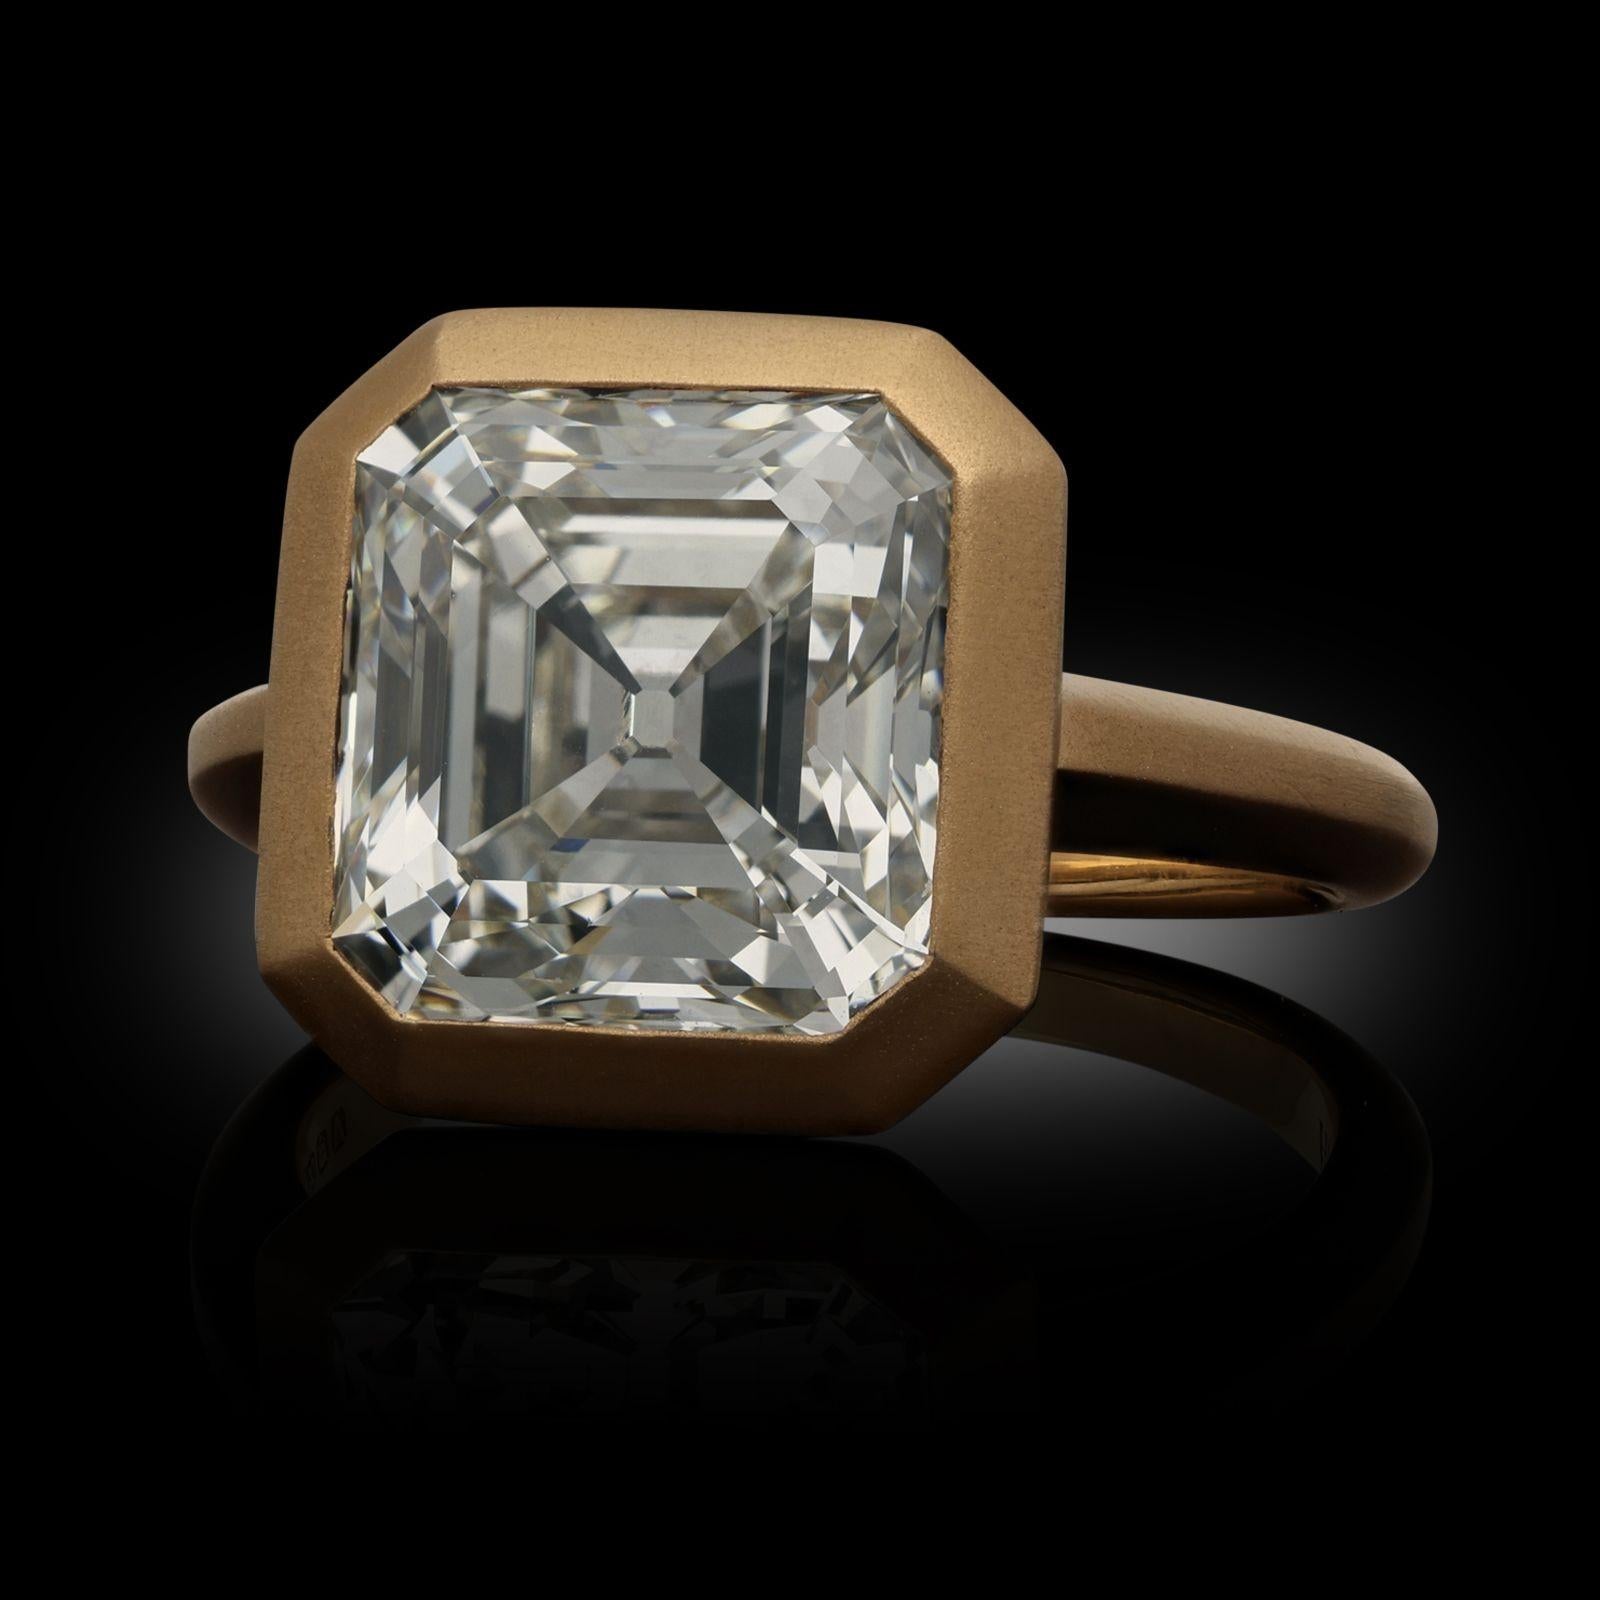 A stunning old-cut diamond and rose gold ring by Hancocks, centred with a wonderful old asscher-cut diamond weighing 5.06ct and of J colour and VVS2 clarity bezel set within a finely hand crafted 18ct rose gold mount with knife edge band and softly